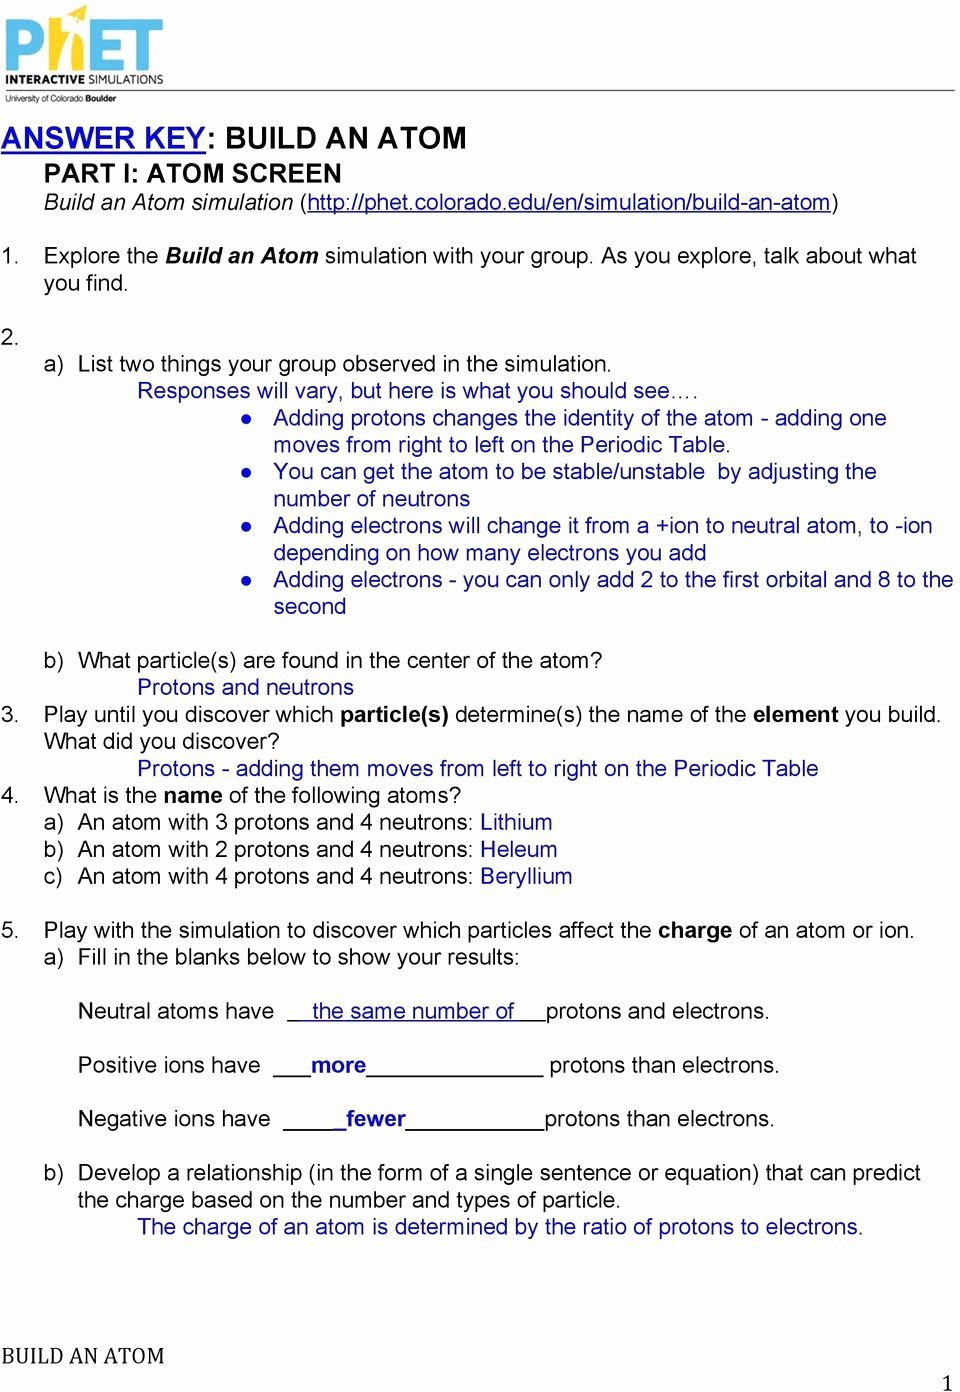 Chemistry Of Life Worksheet Best Of Biology Chapter 2 the Chemistry Life Worksheet Answers